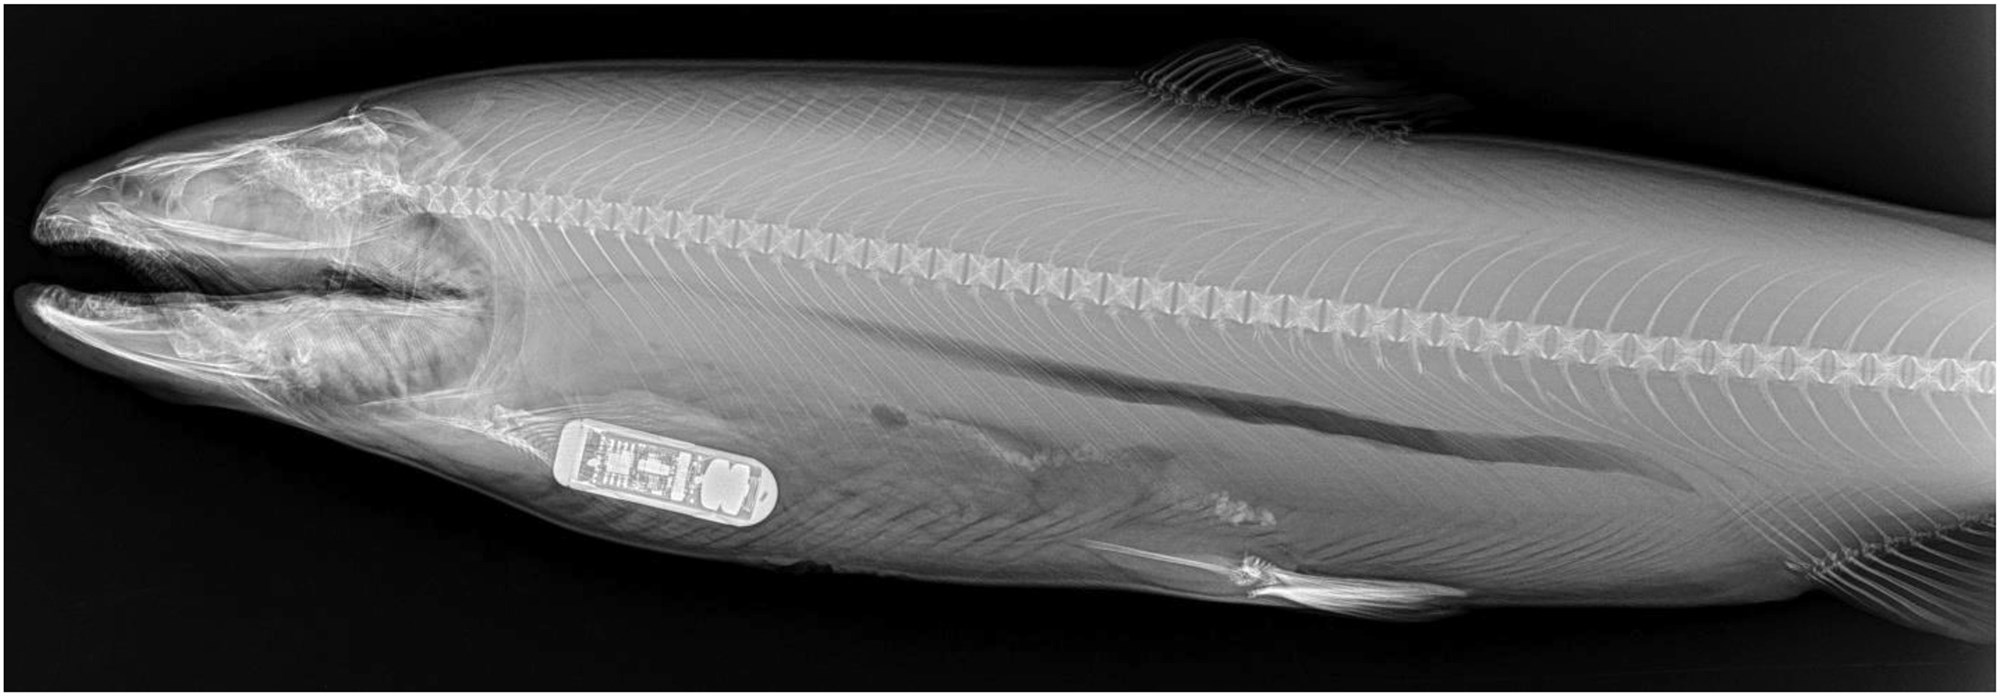 X-ray photograph of a tagged fish